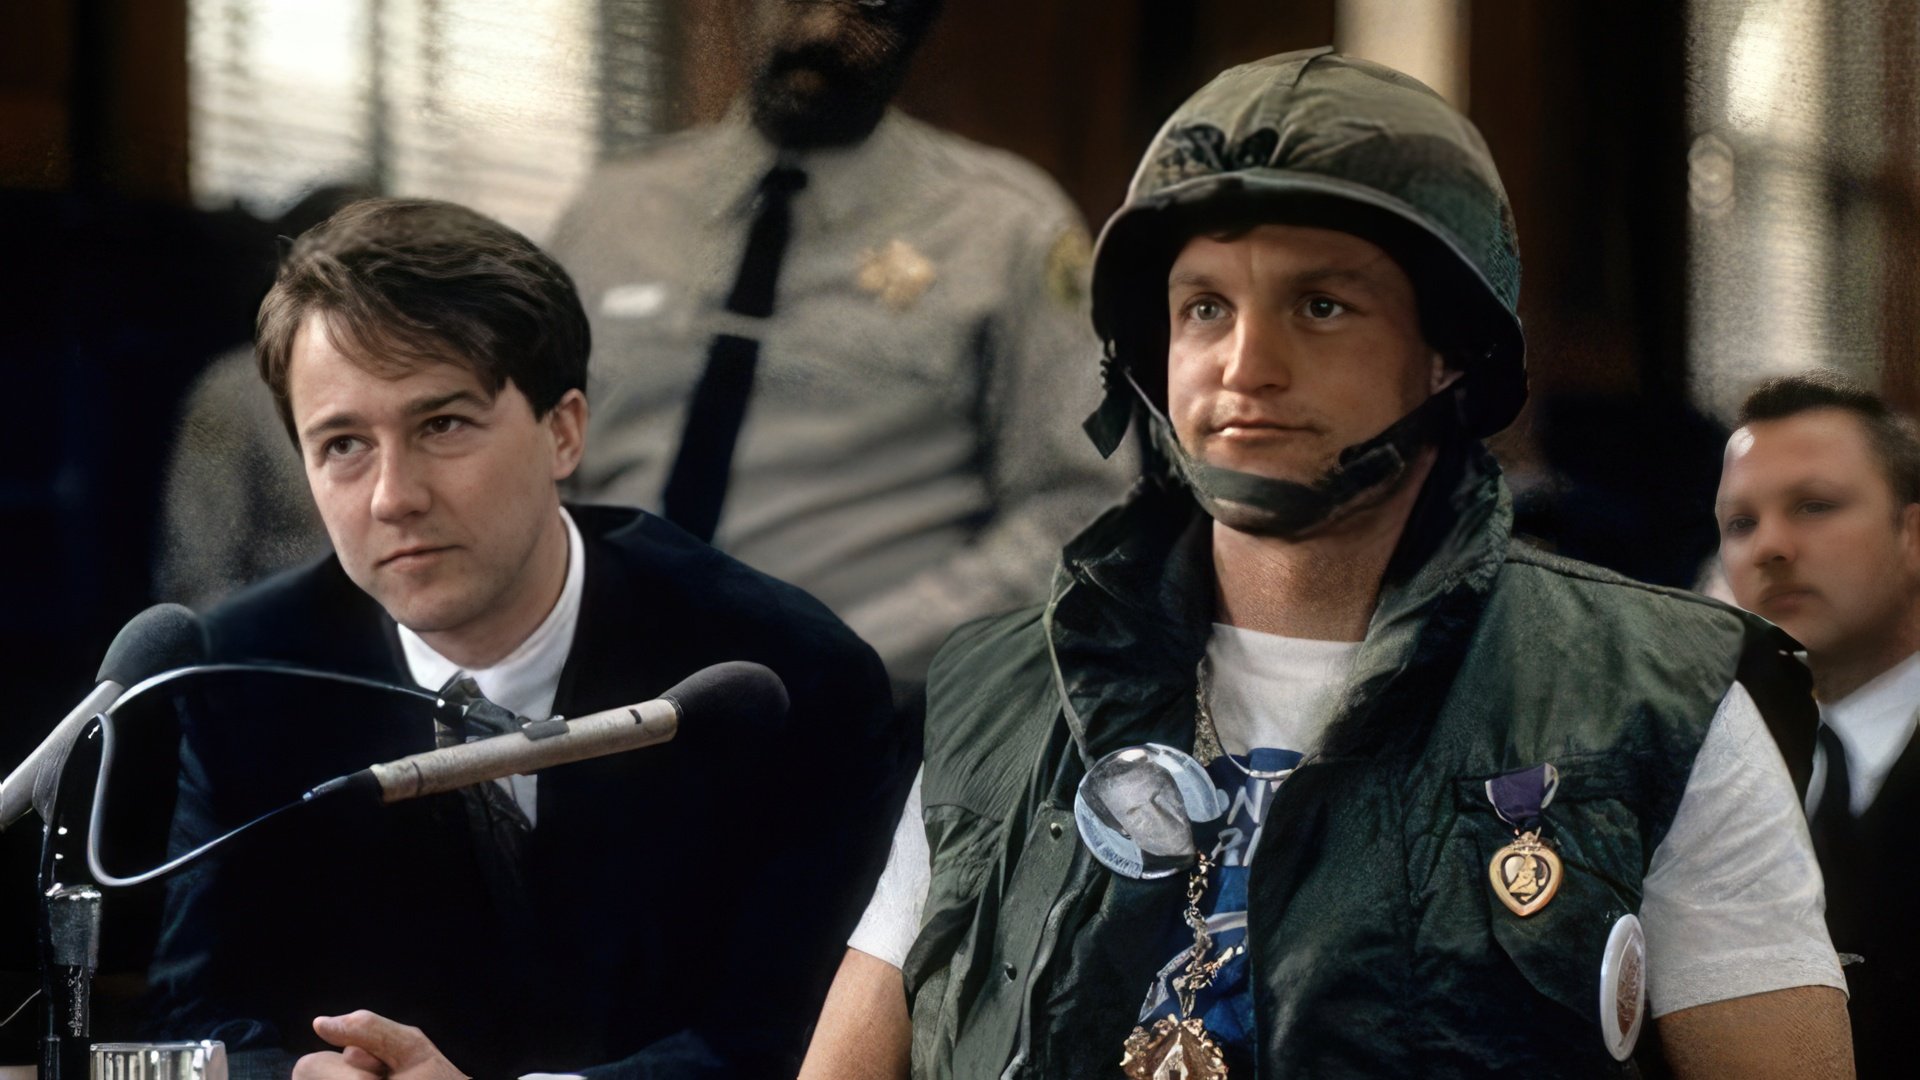 Edward Norton and Woody Harrelson in “The People vs. Larry Flynt”